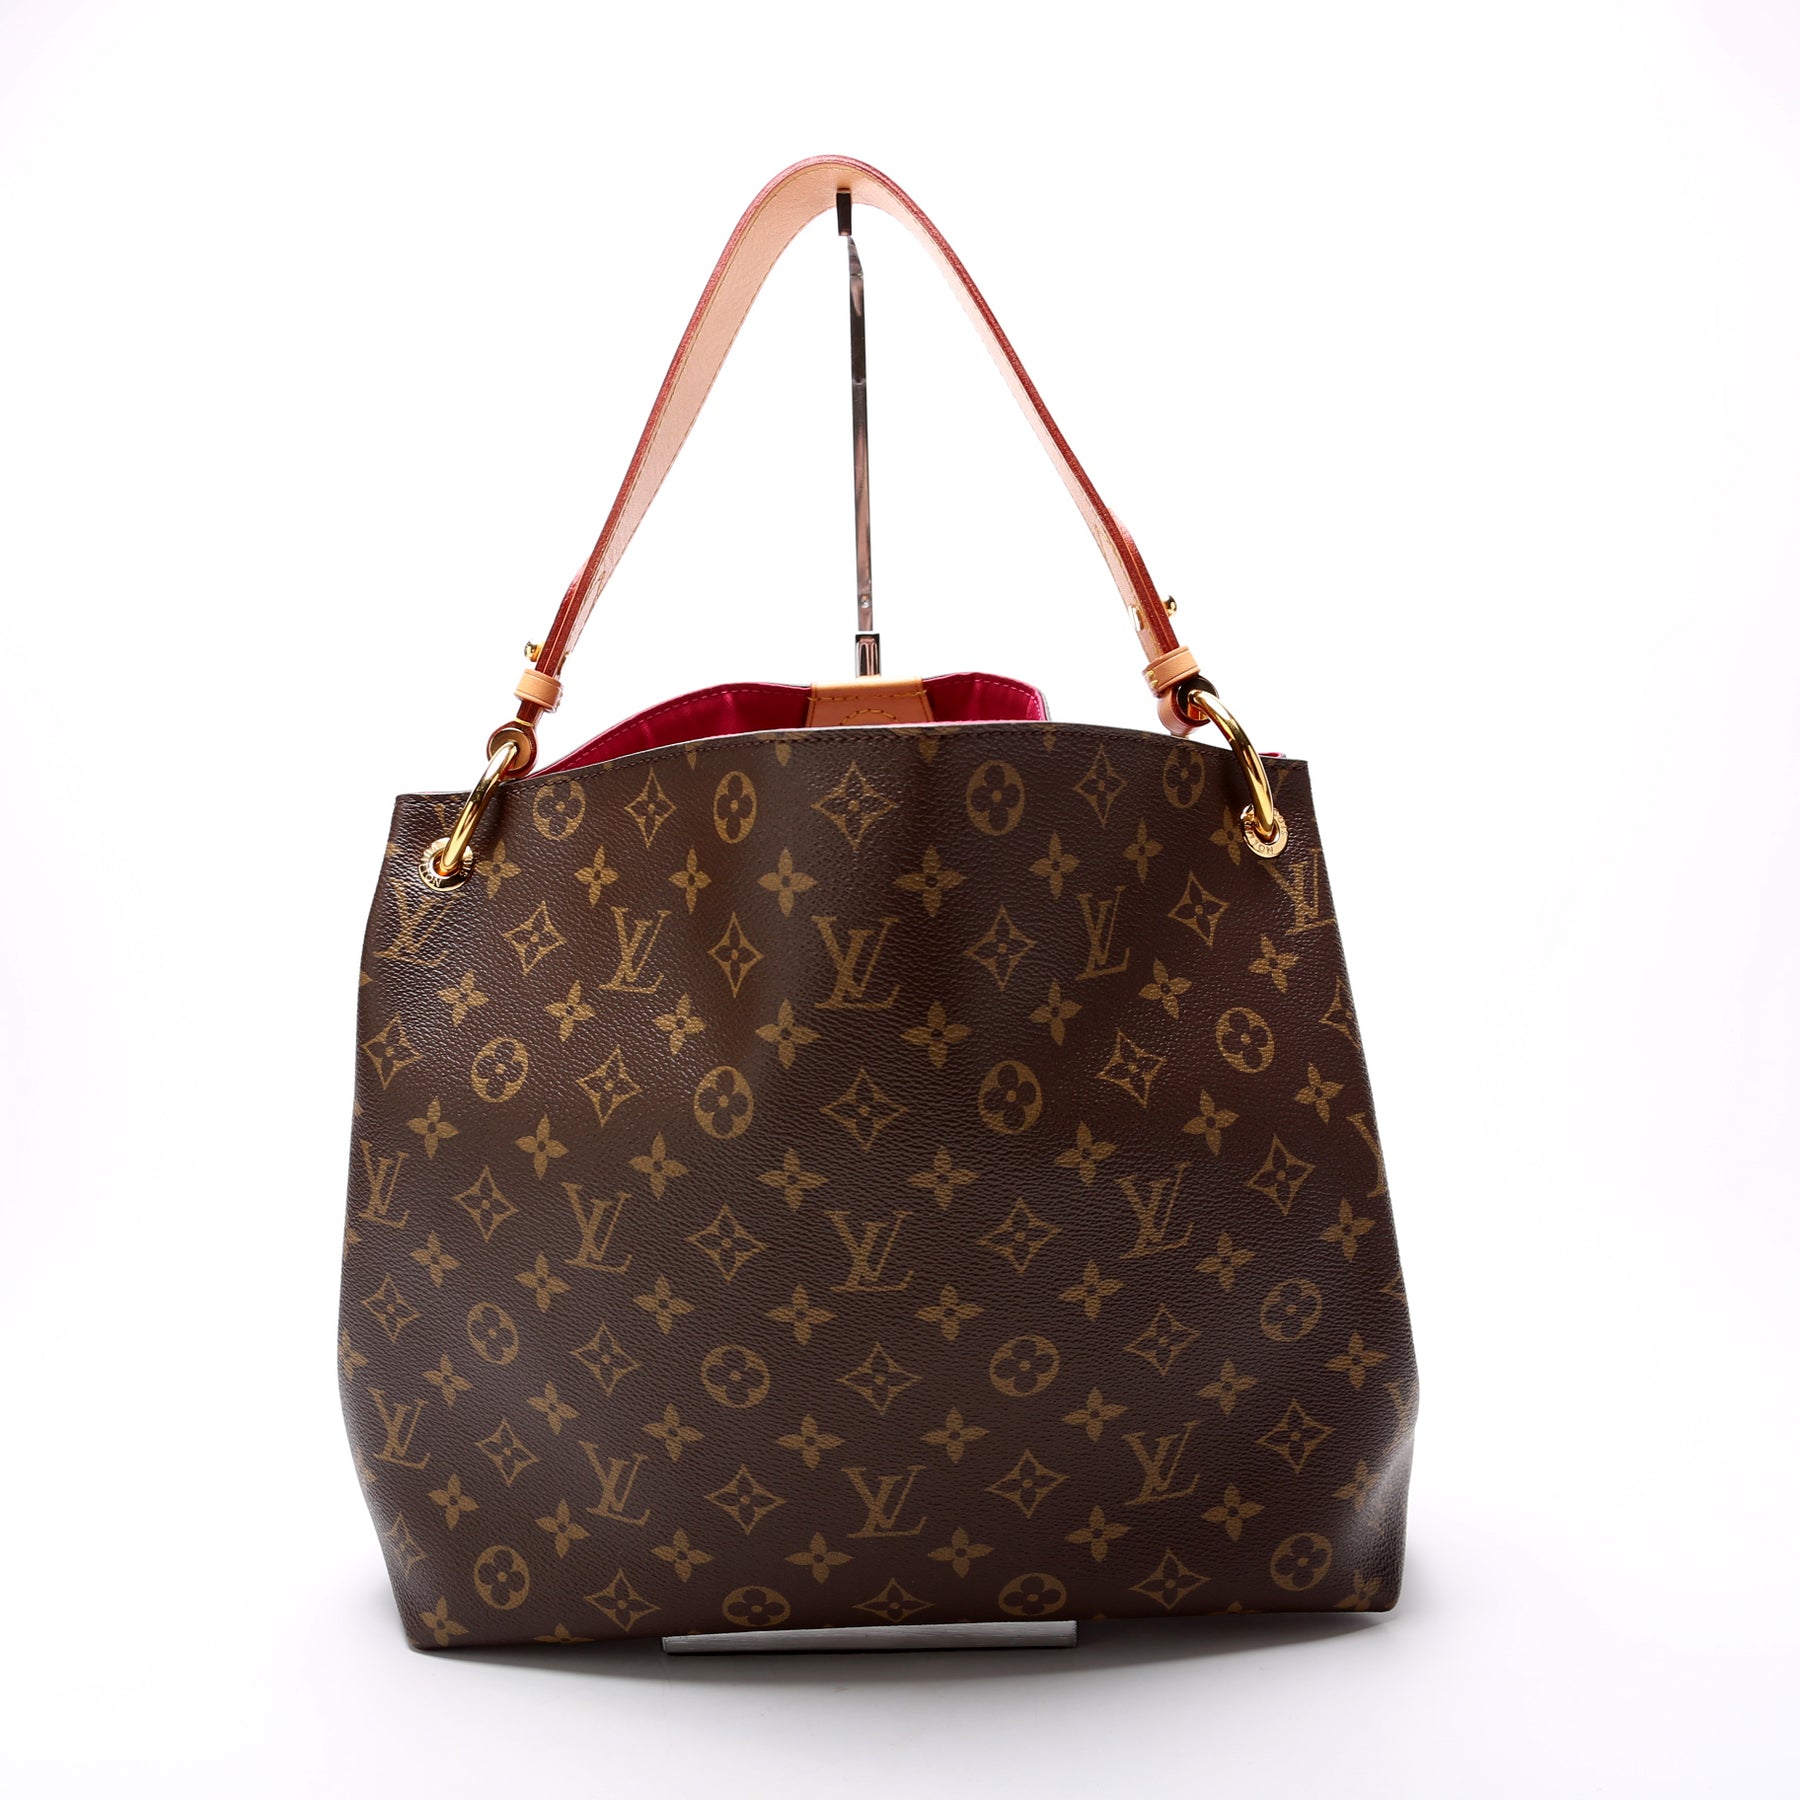 Louis Vuitton Graceful PM, 3 year review